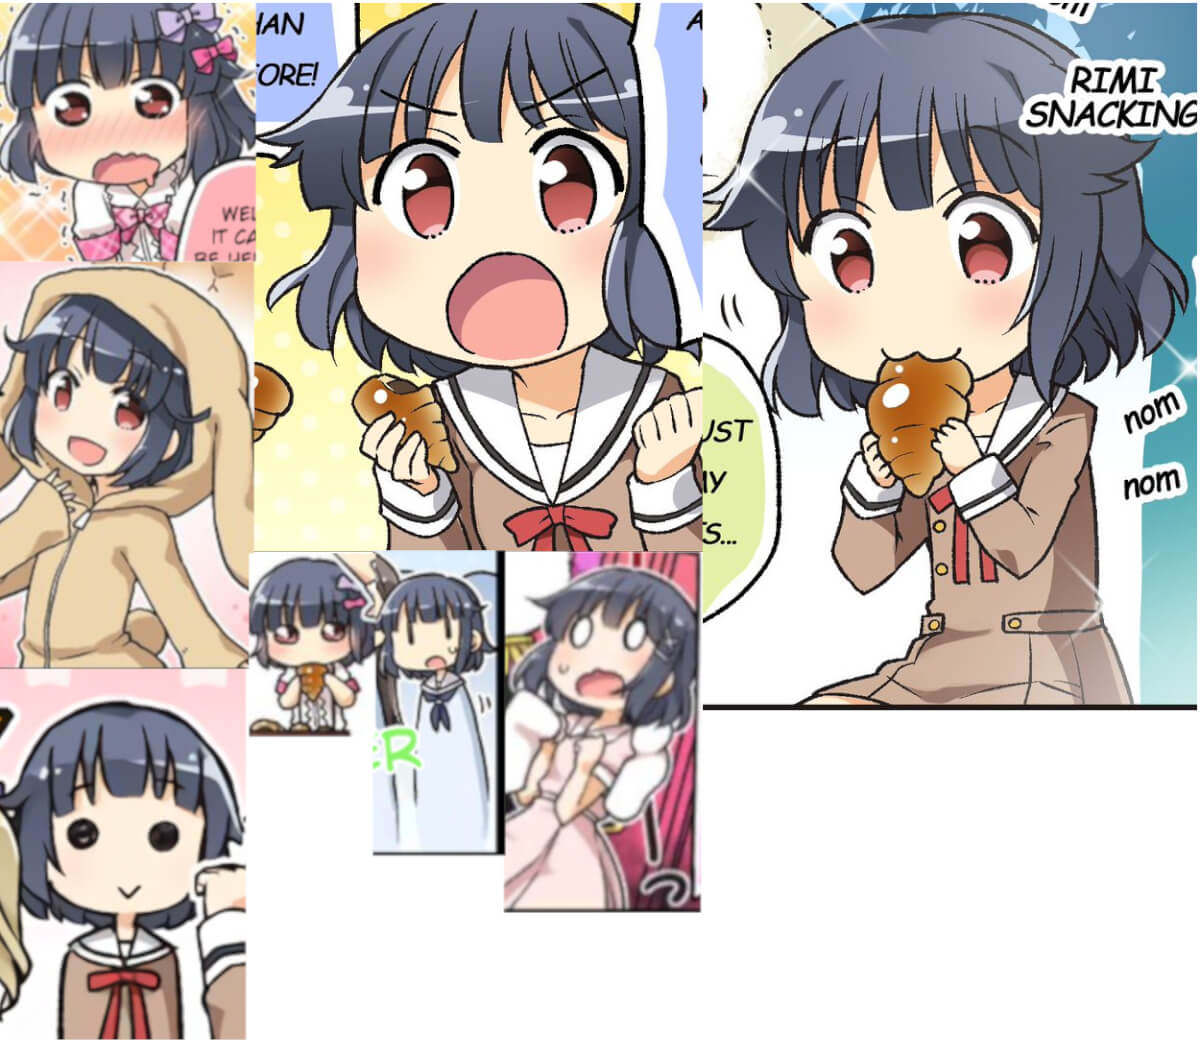 Appreciation for Rimi's appearances in the loading 1Komas and the Twitter 4Komas.
